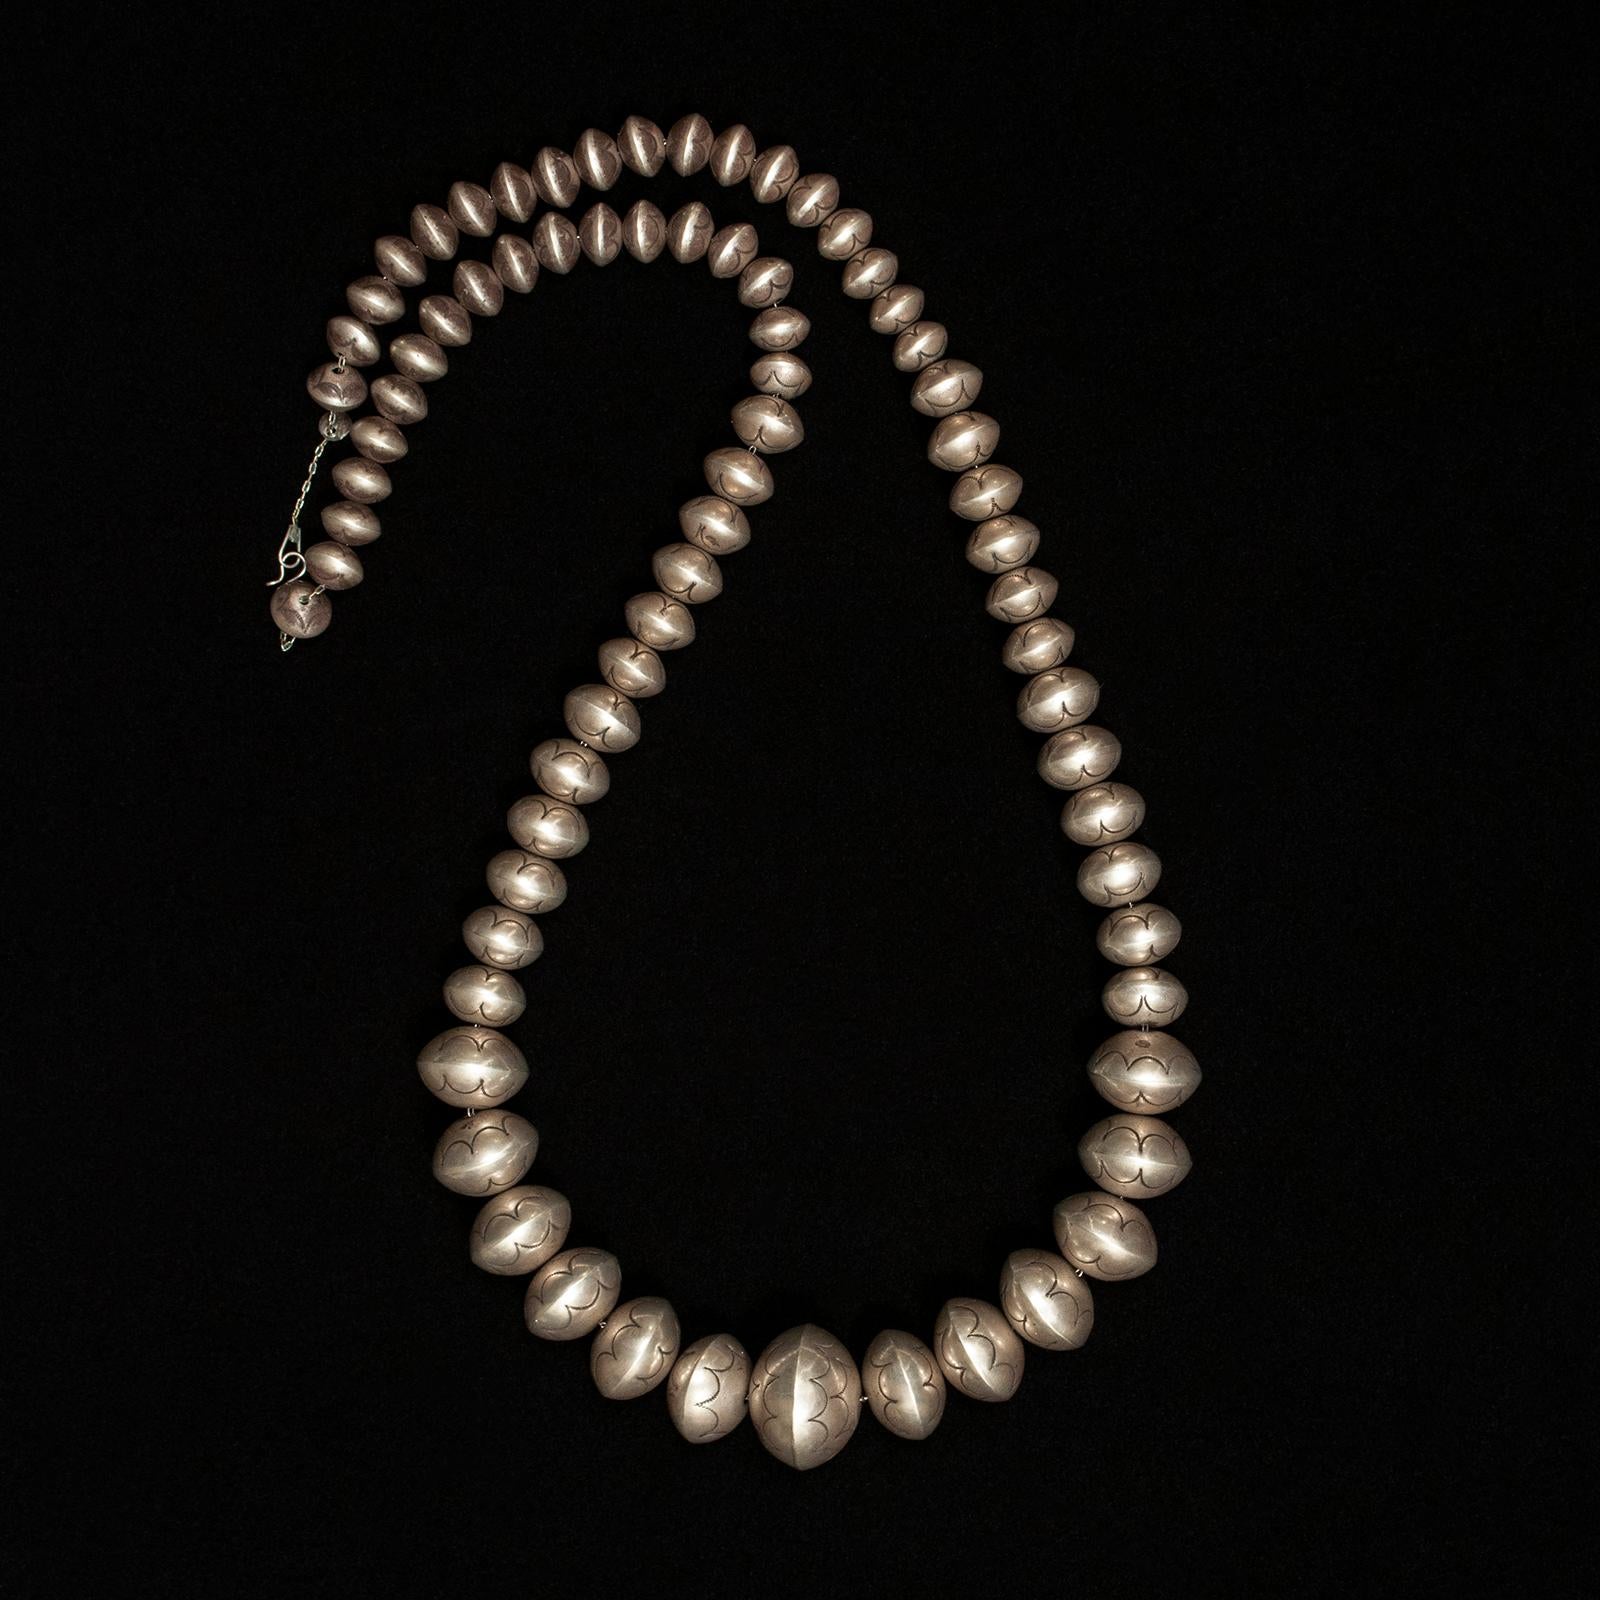 20th century Native American silversmith Leo Yazzie silver pearl necklace

This Navajo pearl necklace contains 73 beautifully graduated beads and is 37 inches long. The diameter of the largest bead is 1.25 inches and the entire necklace weighs 206